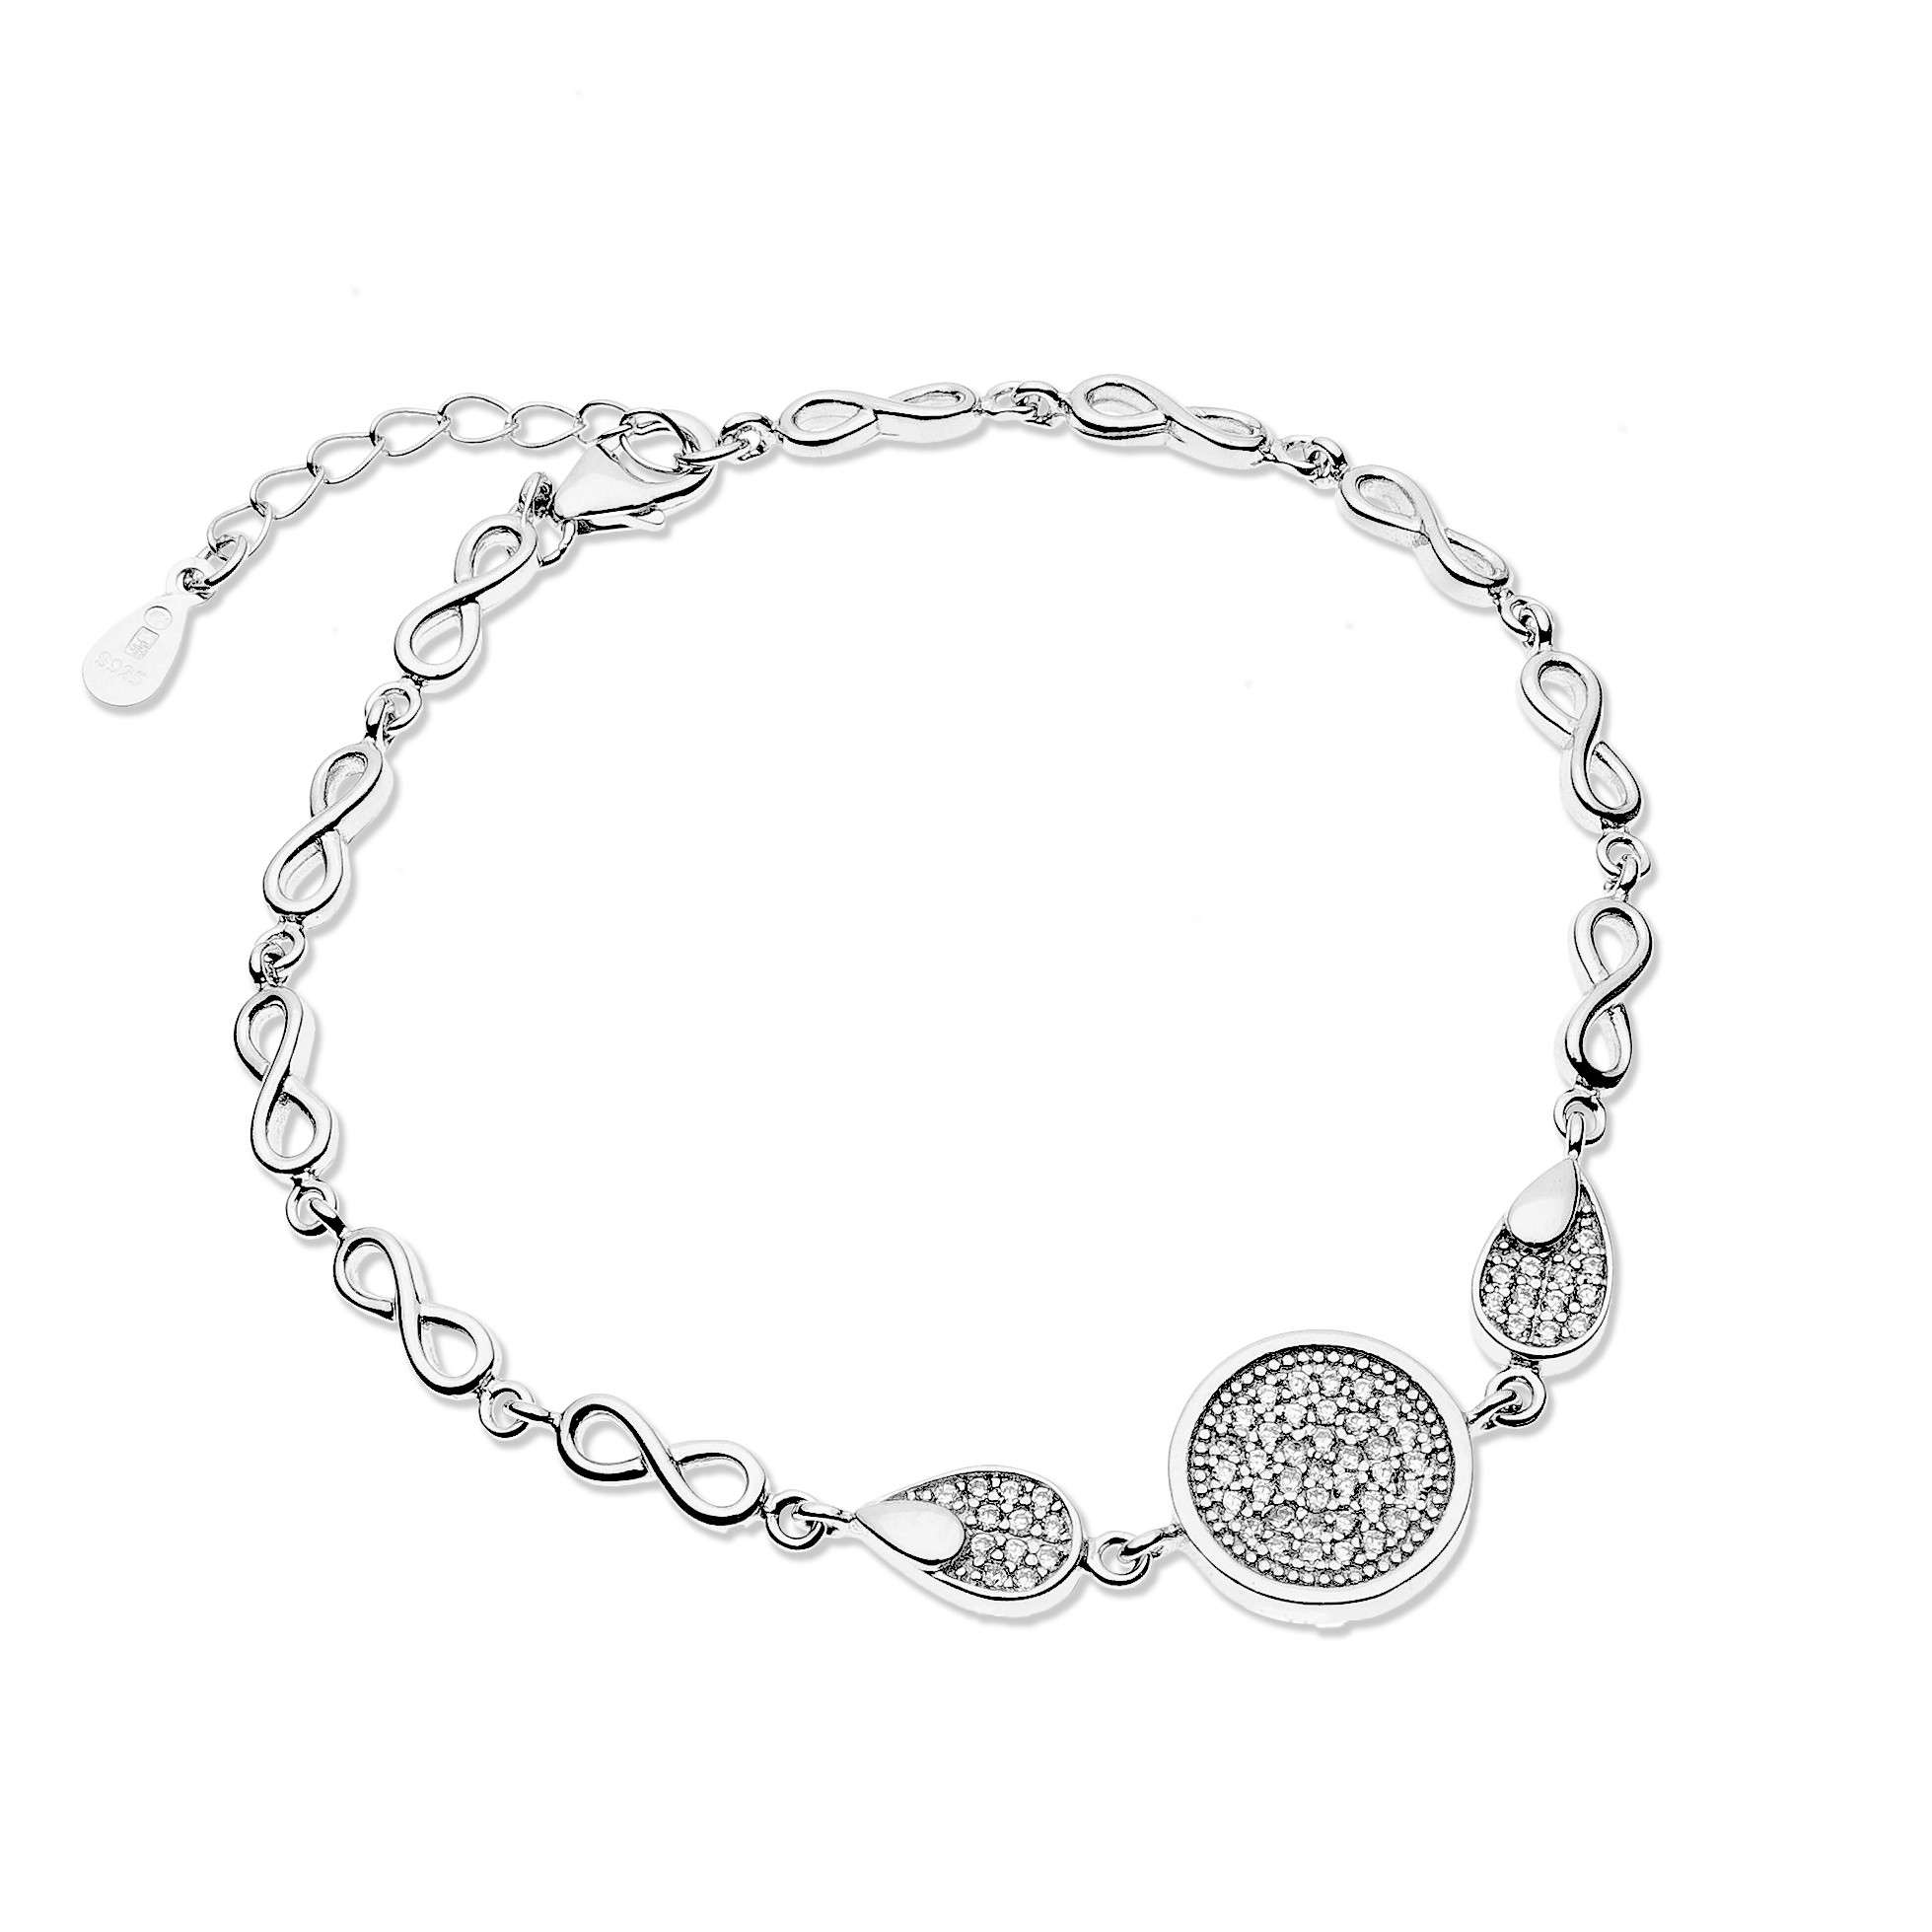 BRACELET WITH CHARMS AND CRYSTALS MODEL A015